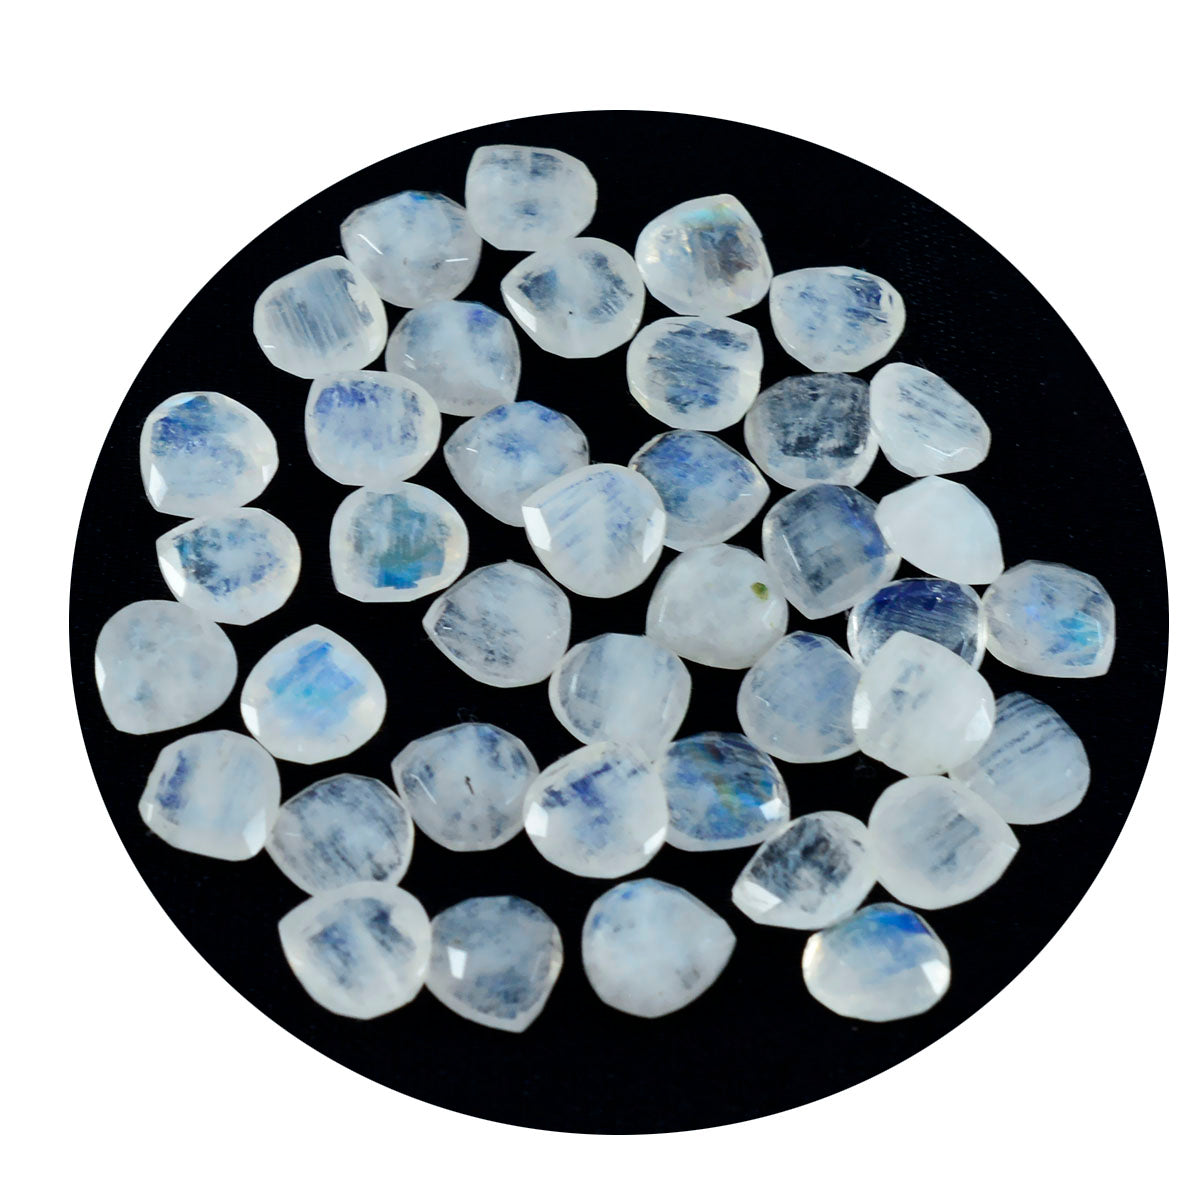 Riyogems 1PC White Rainbow Moonstone Faceted 6x6 mm Heart Shape attractive Quality Gems